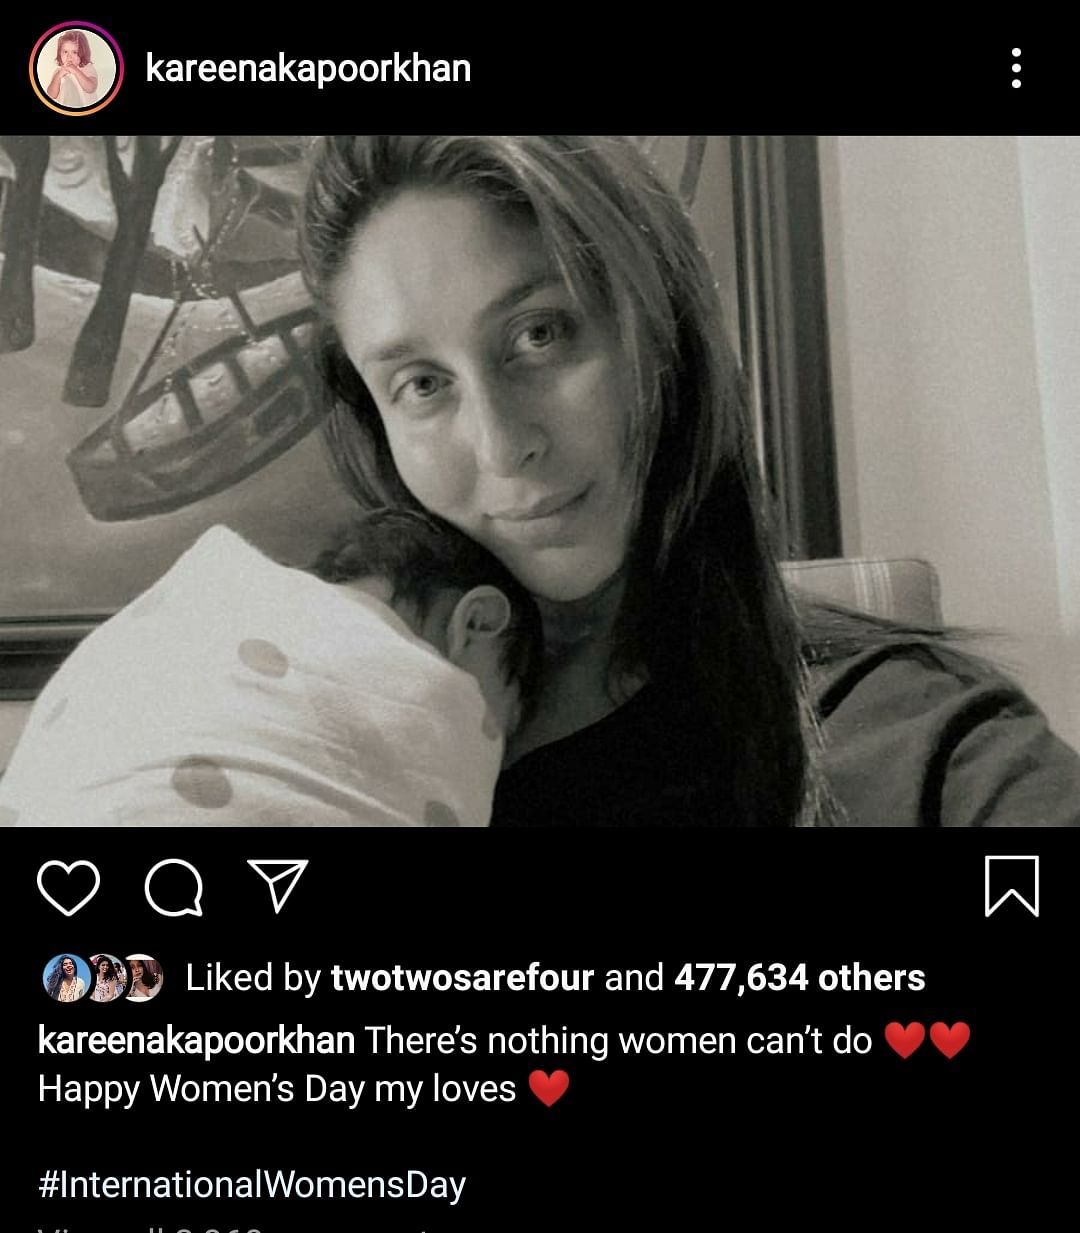 Kareena shared a selfie holding her newborn baby in a post for International Women’s Day. 